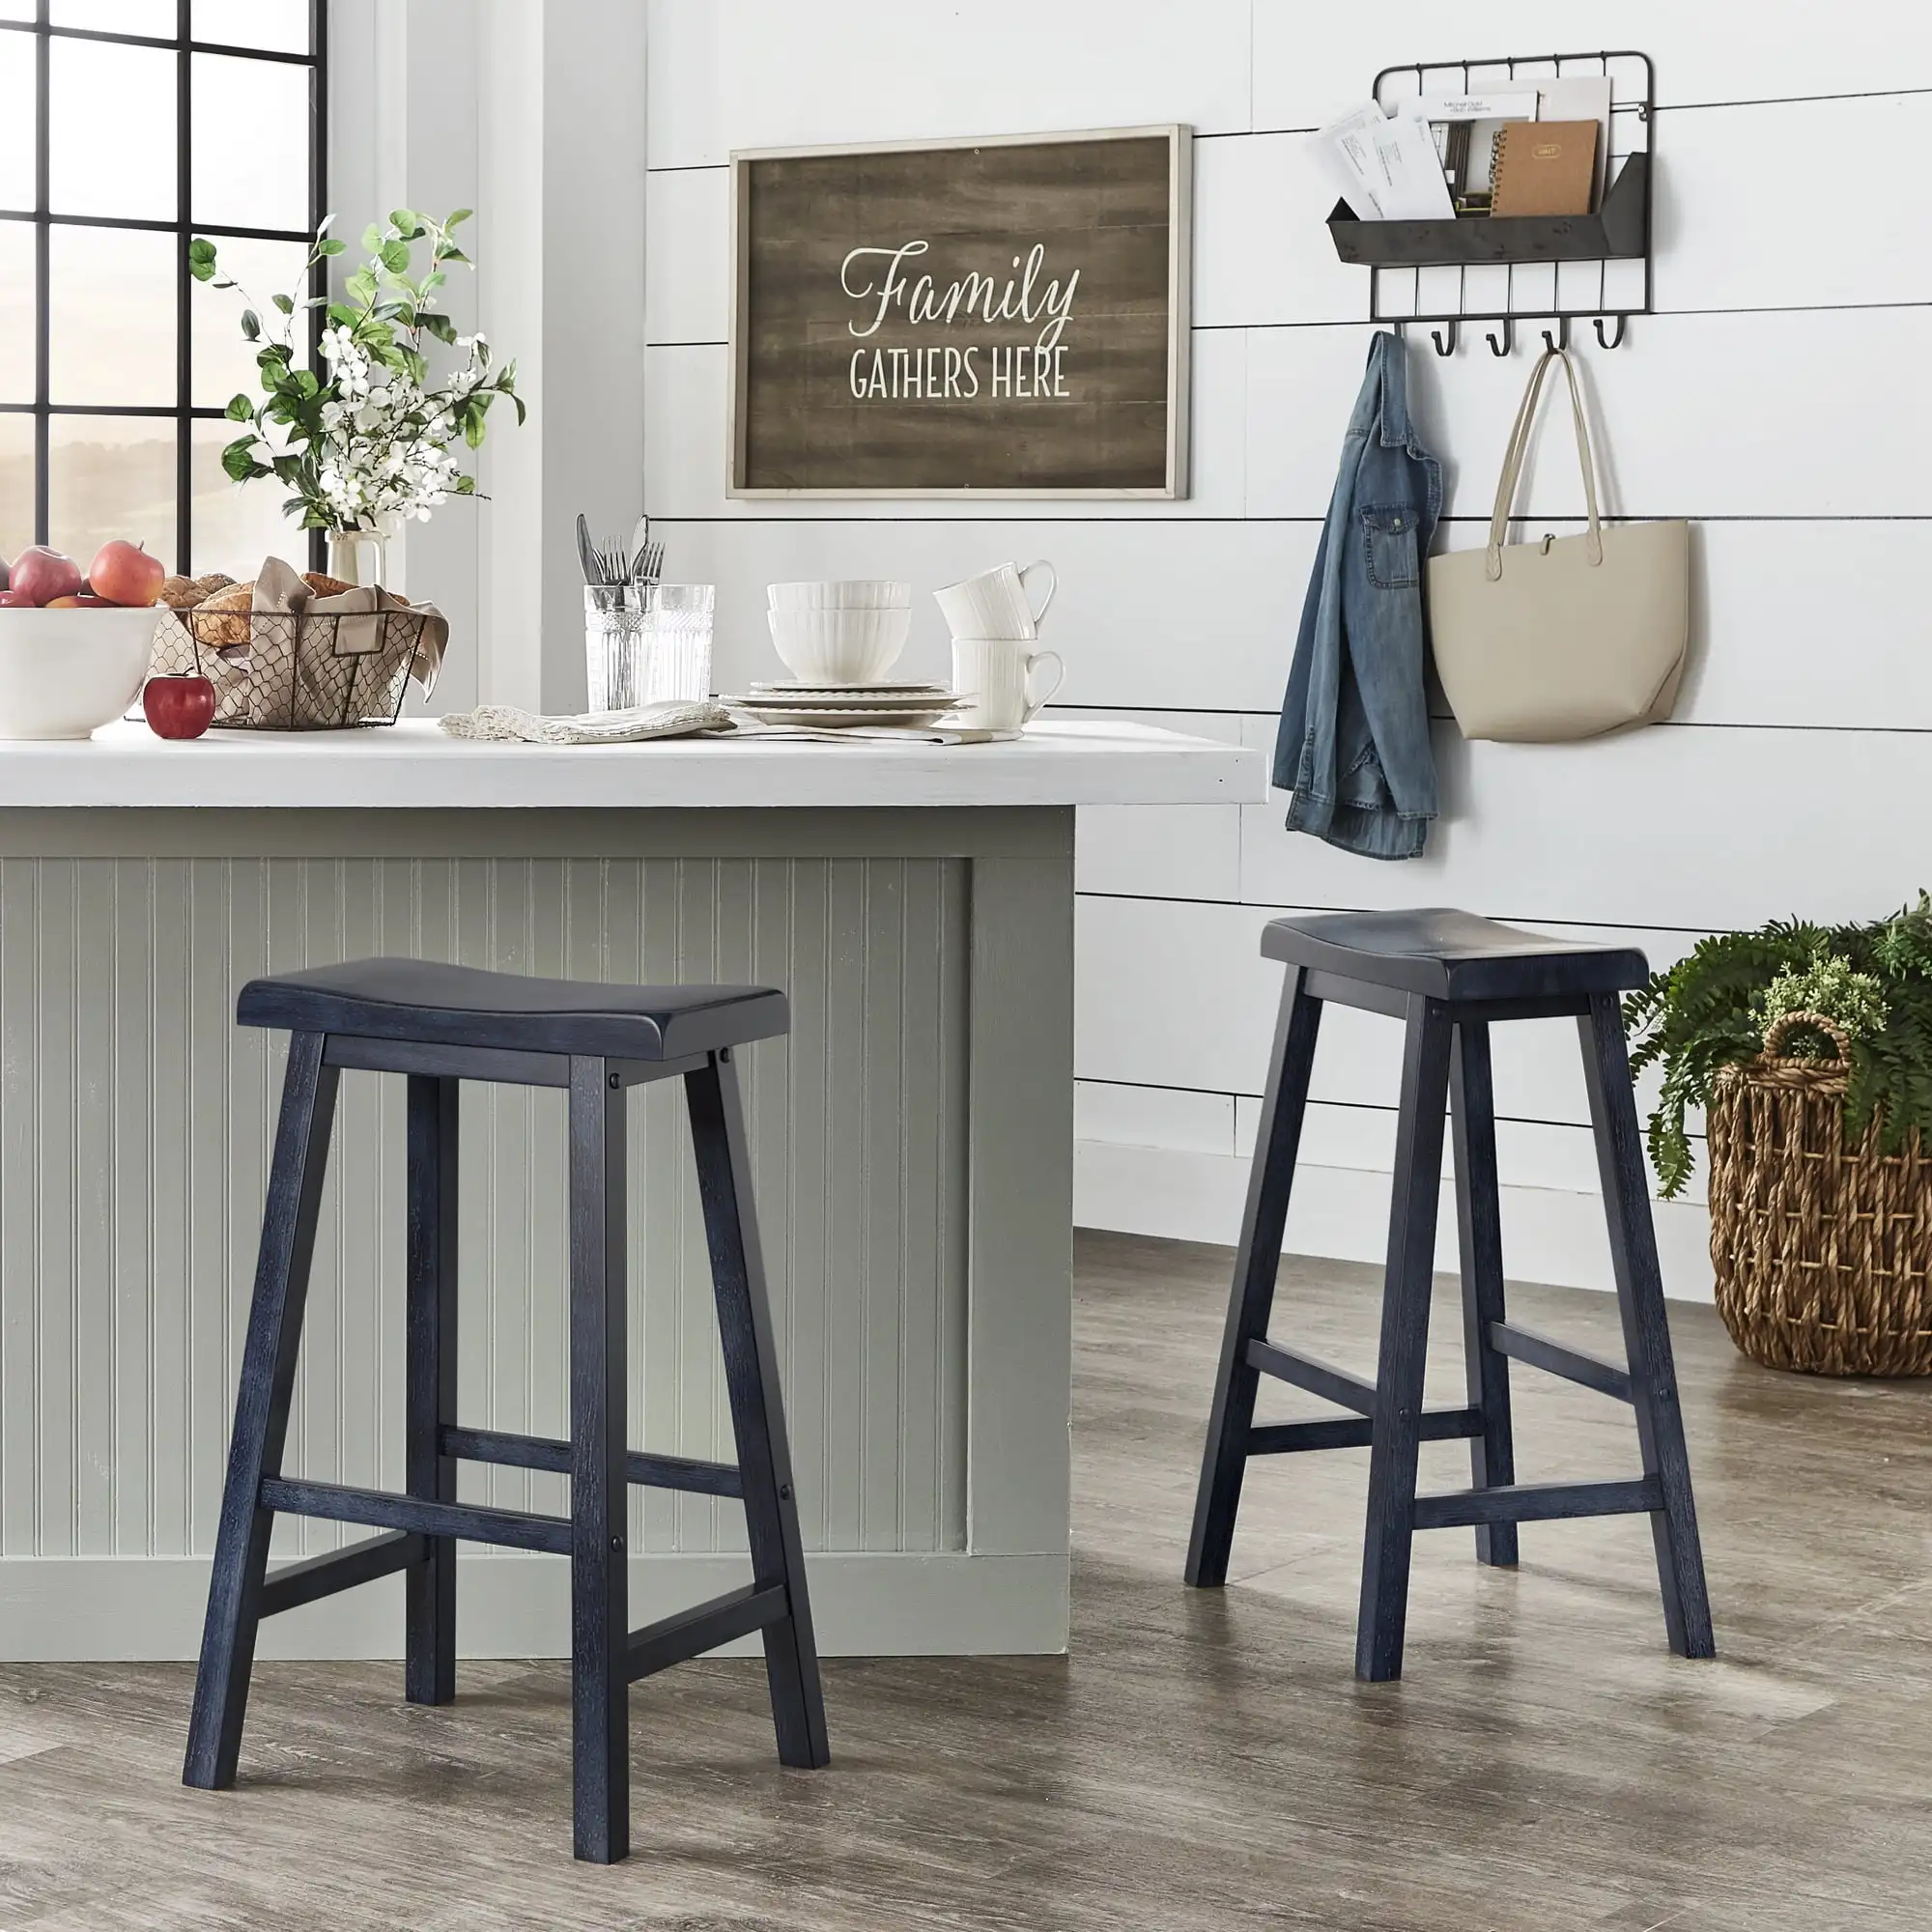 

Bar Chairs Set of 2 Backless Saddle Seat Wood Counter Stools Denim Color